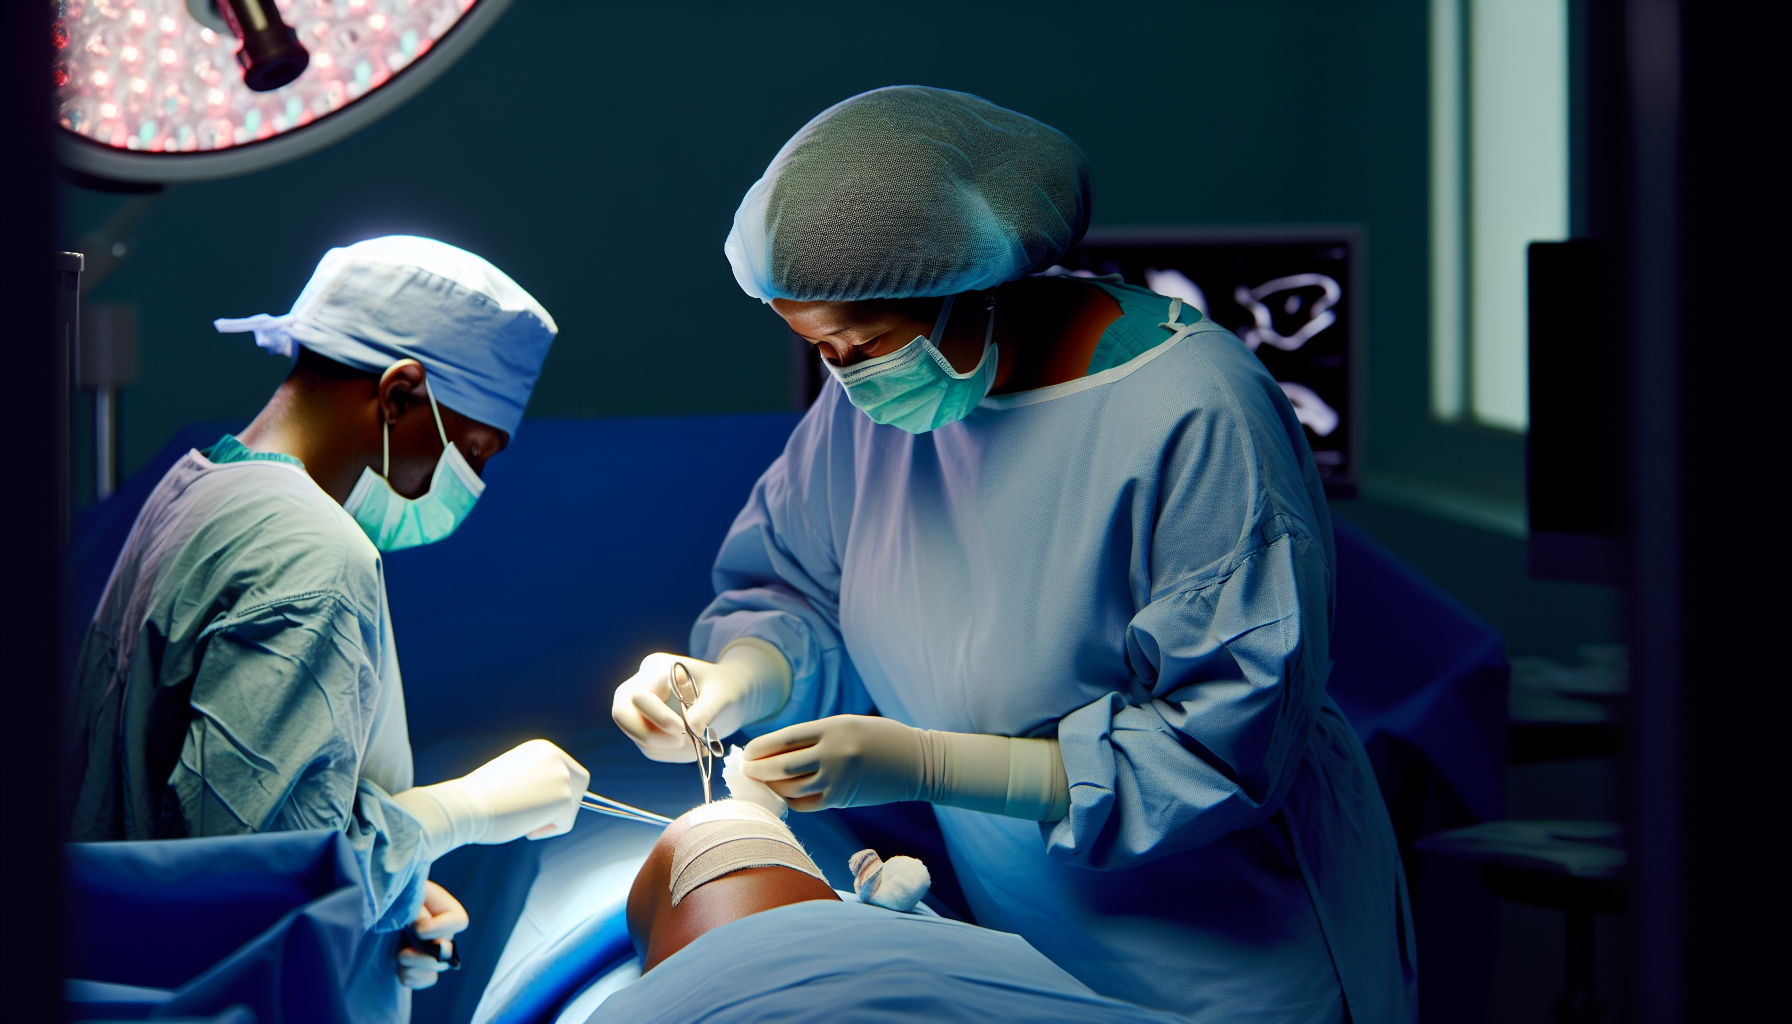 Surgeon performing ACL reconstruction surgery